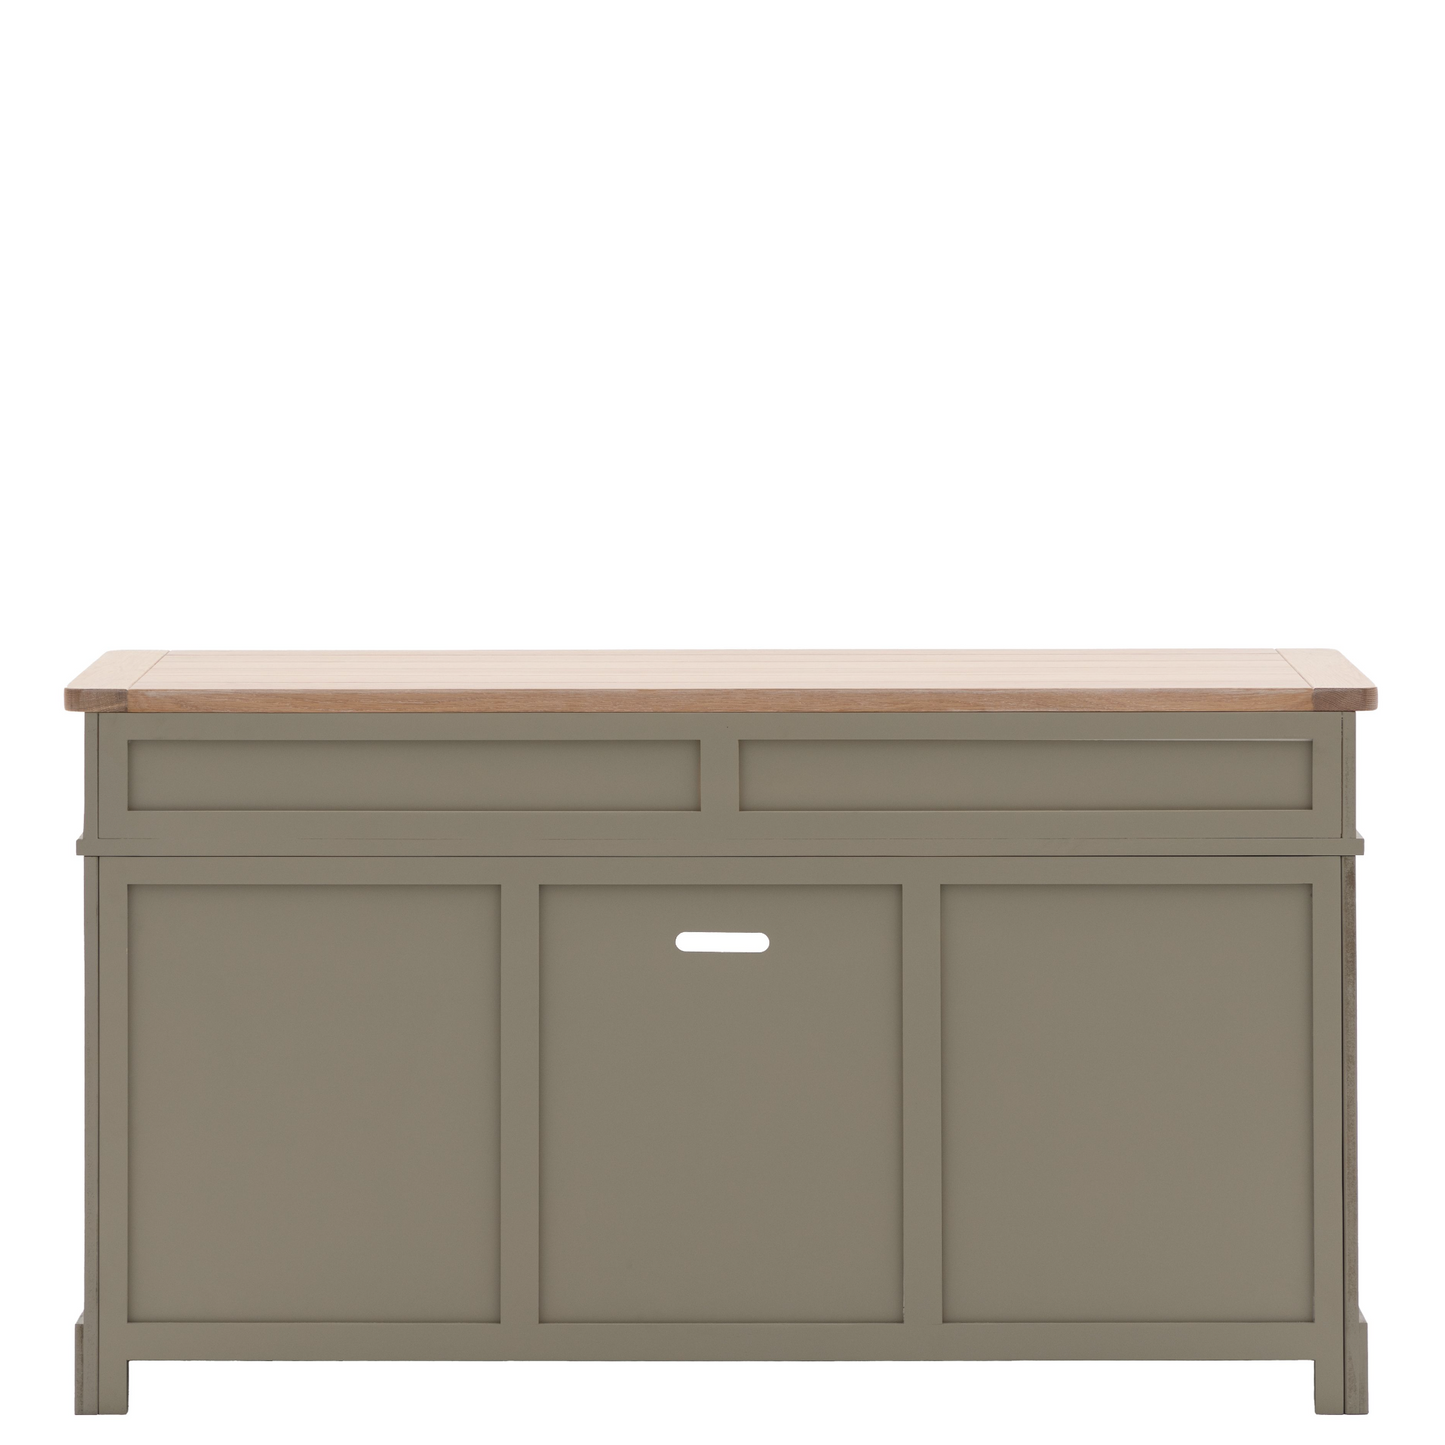 A Prairie sideboard featuring two drawers and a wooden top for home furniture and interior decor.